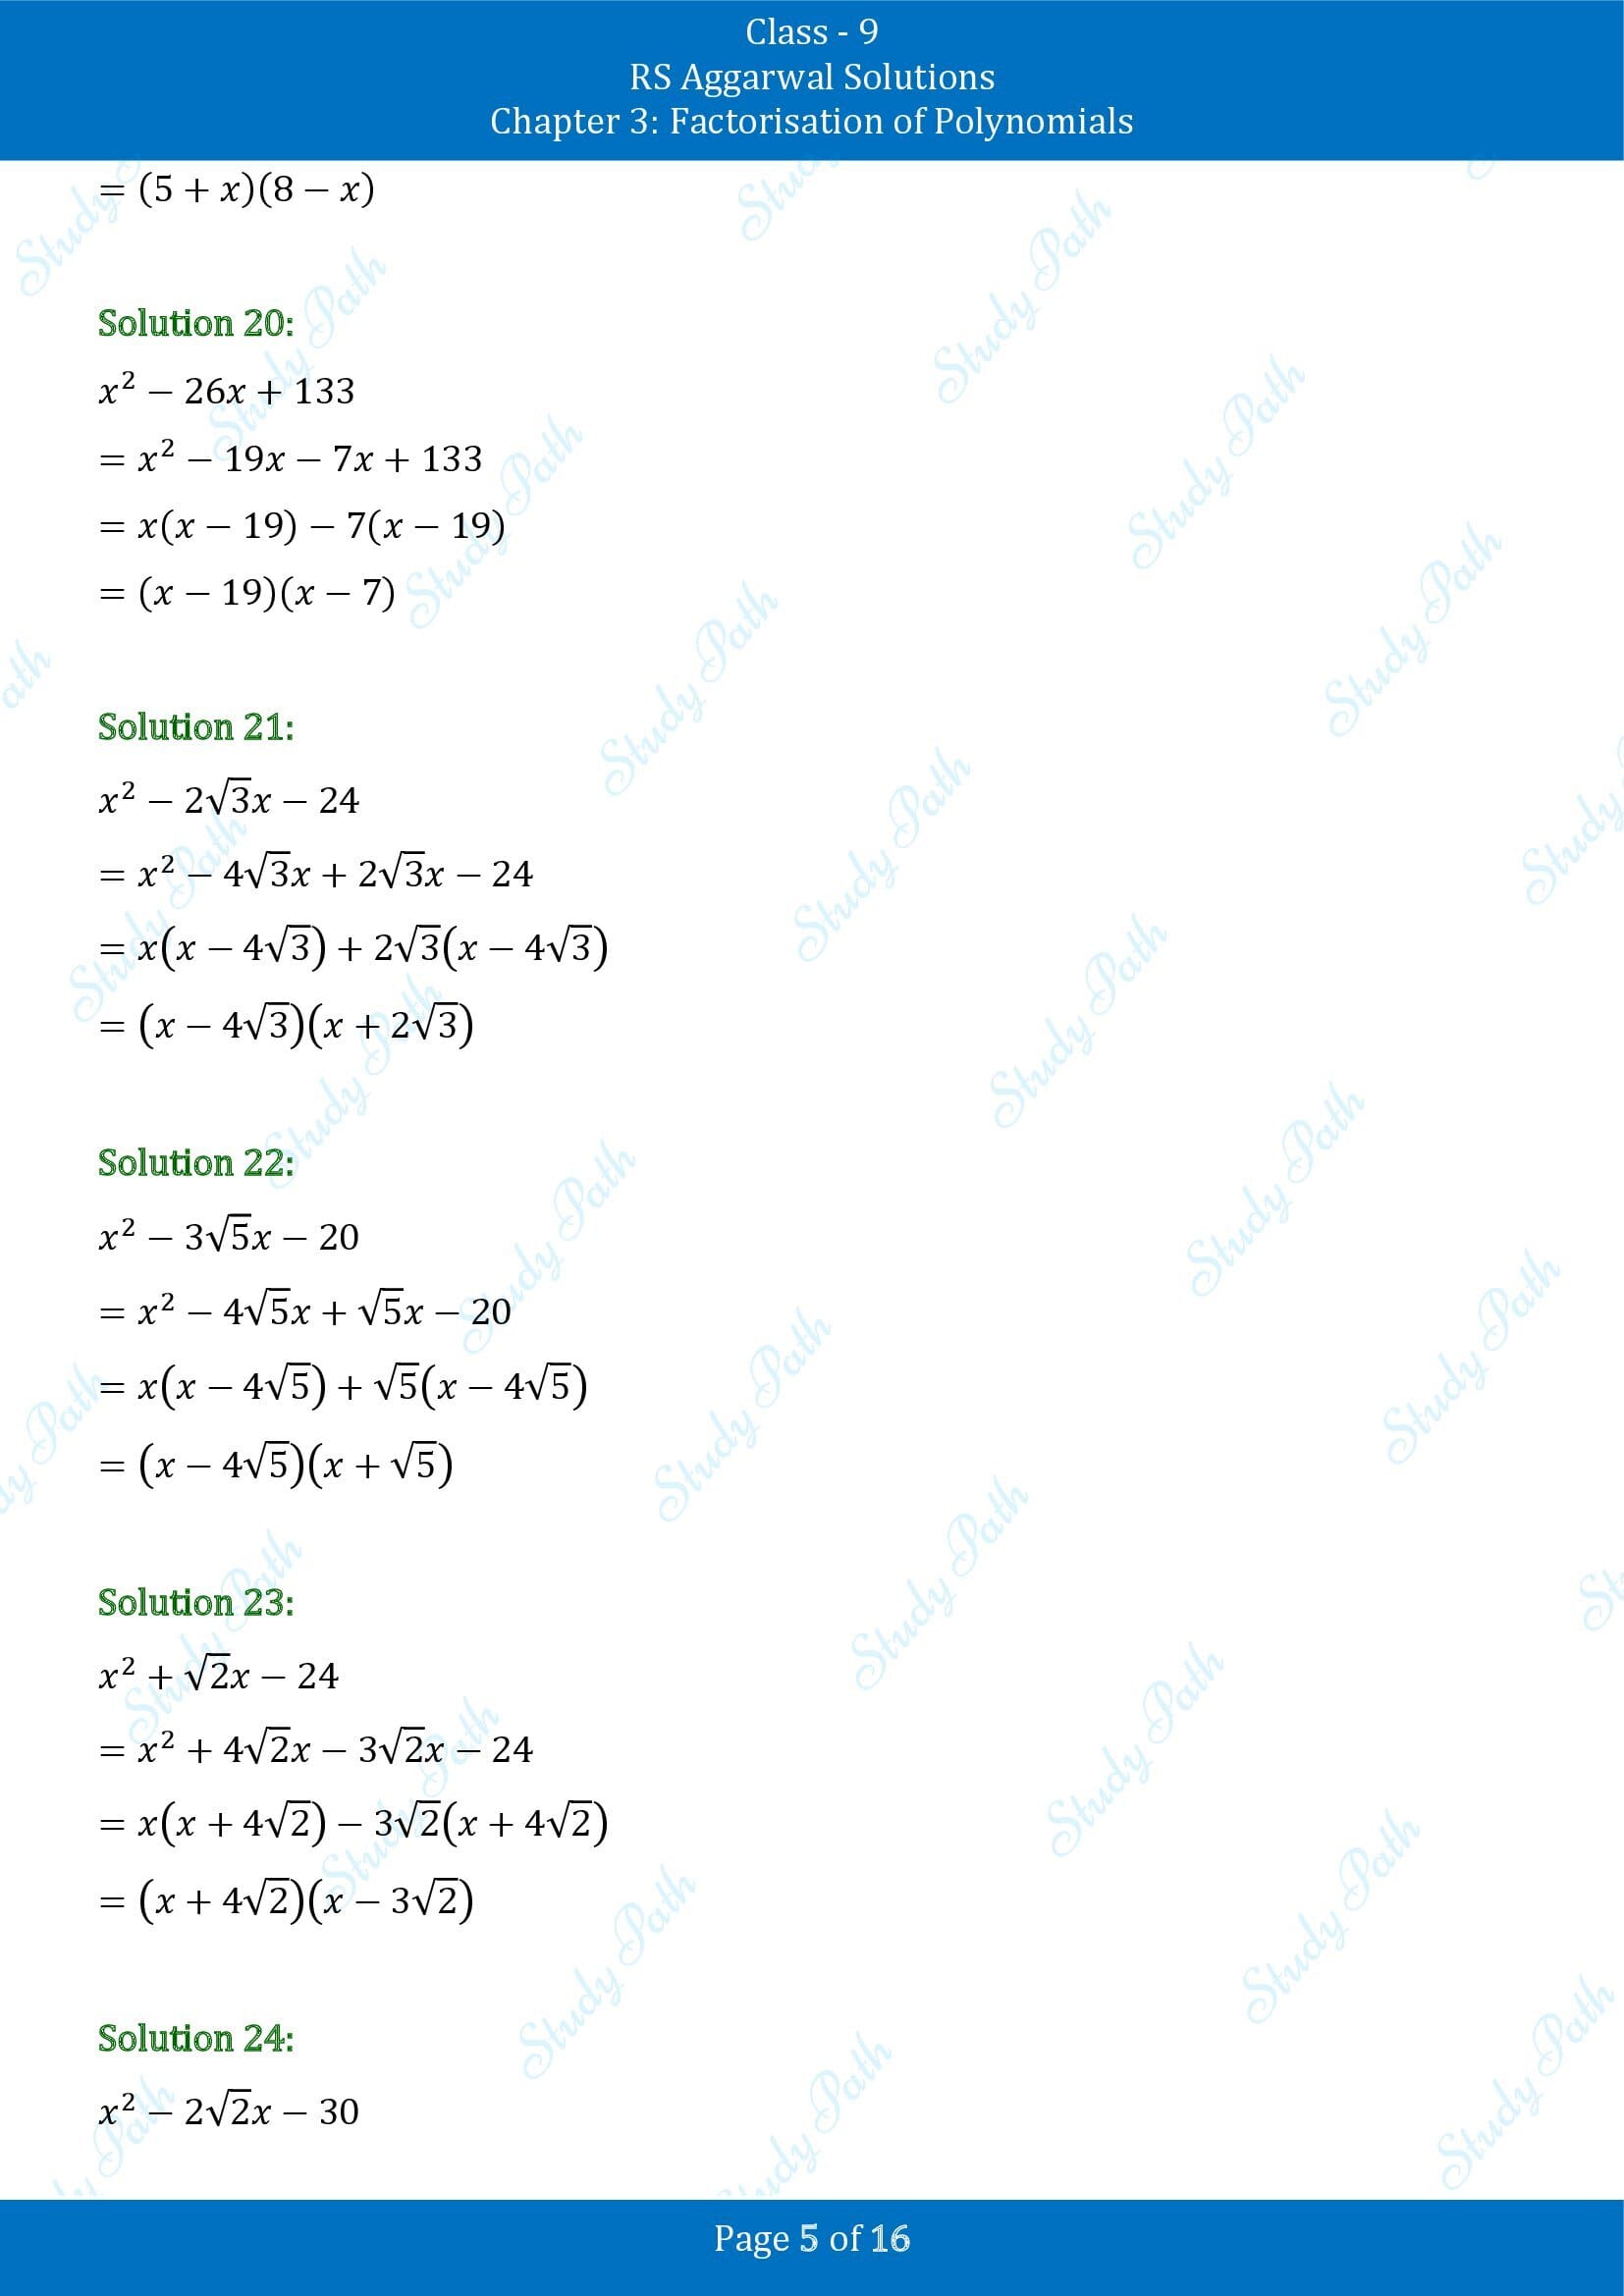 RS Aggarwal Solutions Class 9 Chapter 3 Factorisation of Polynomials Exercise 3C 00005